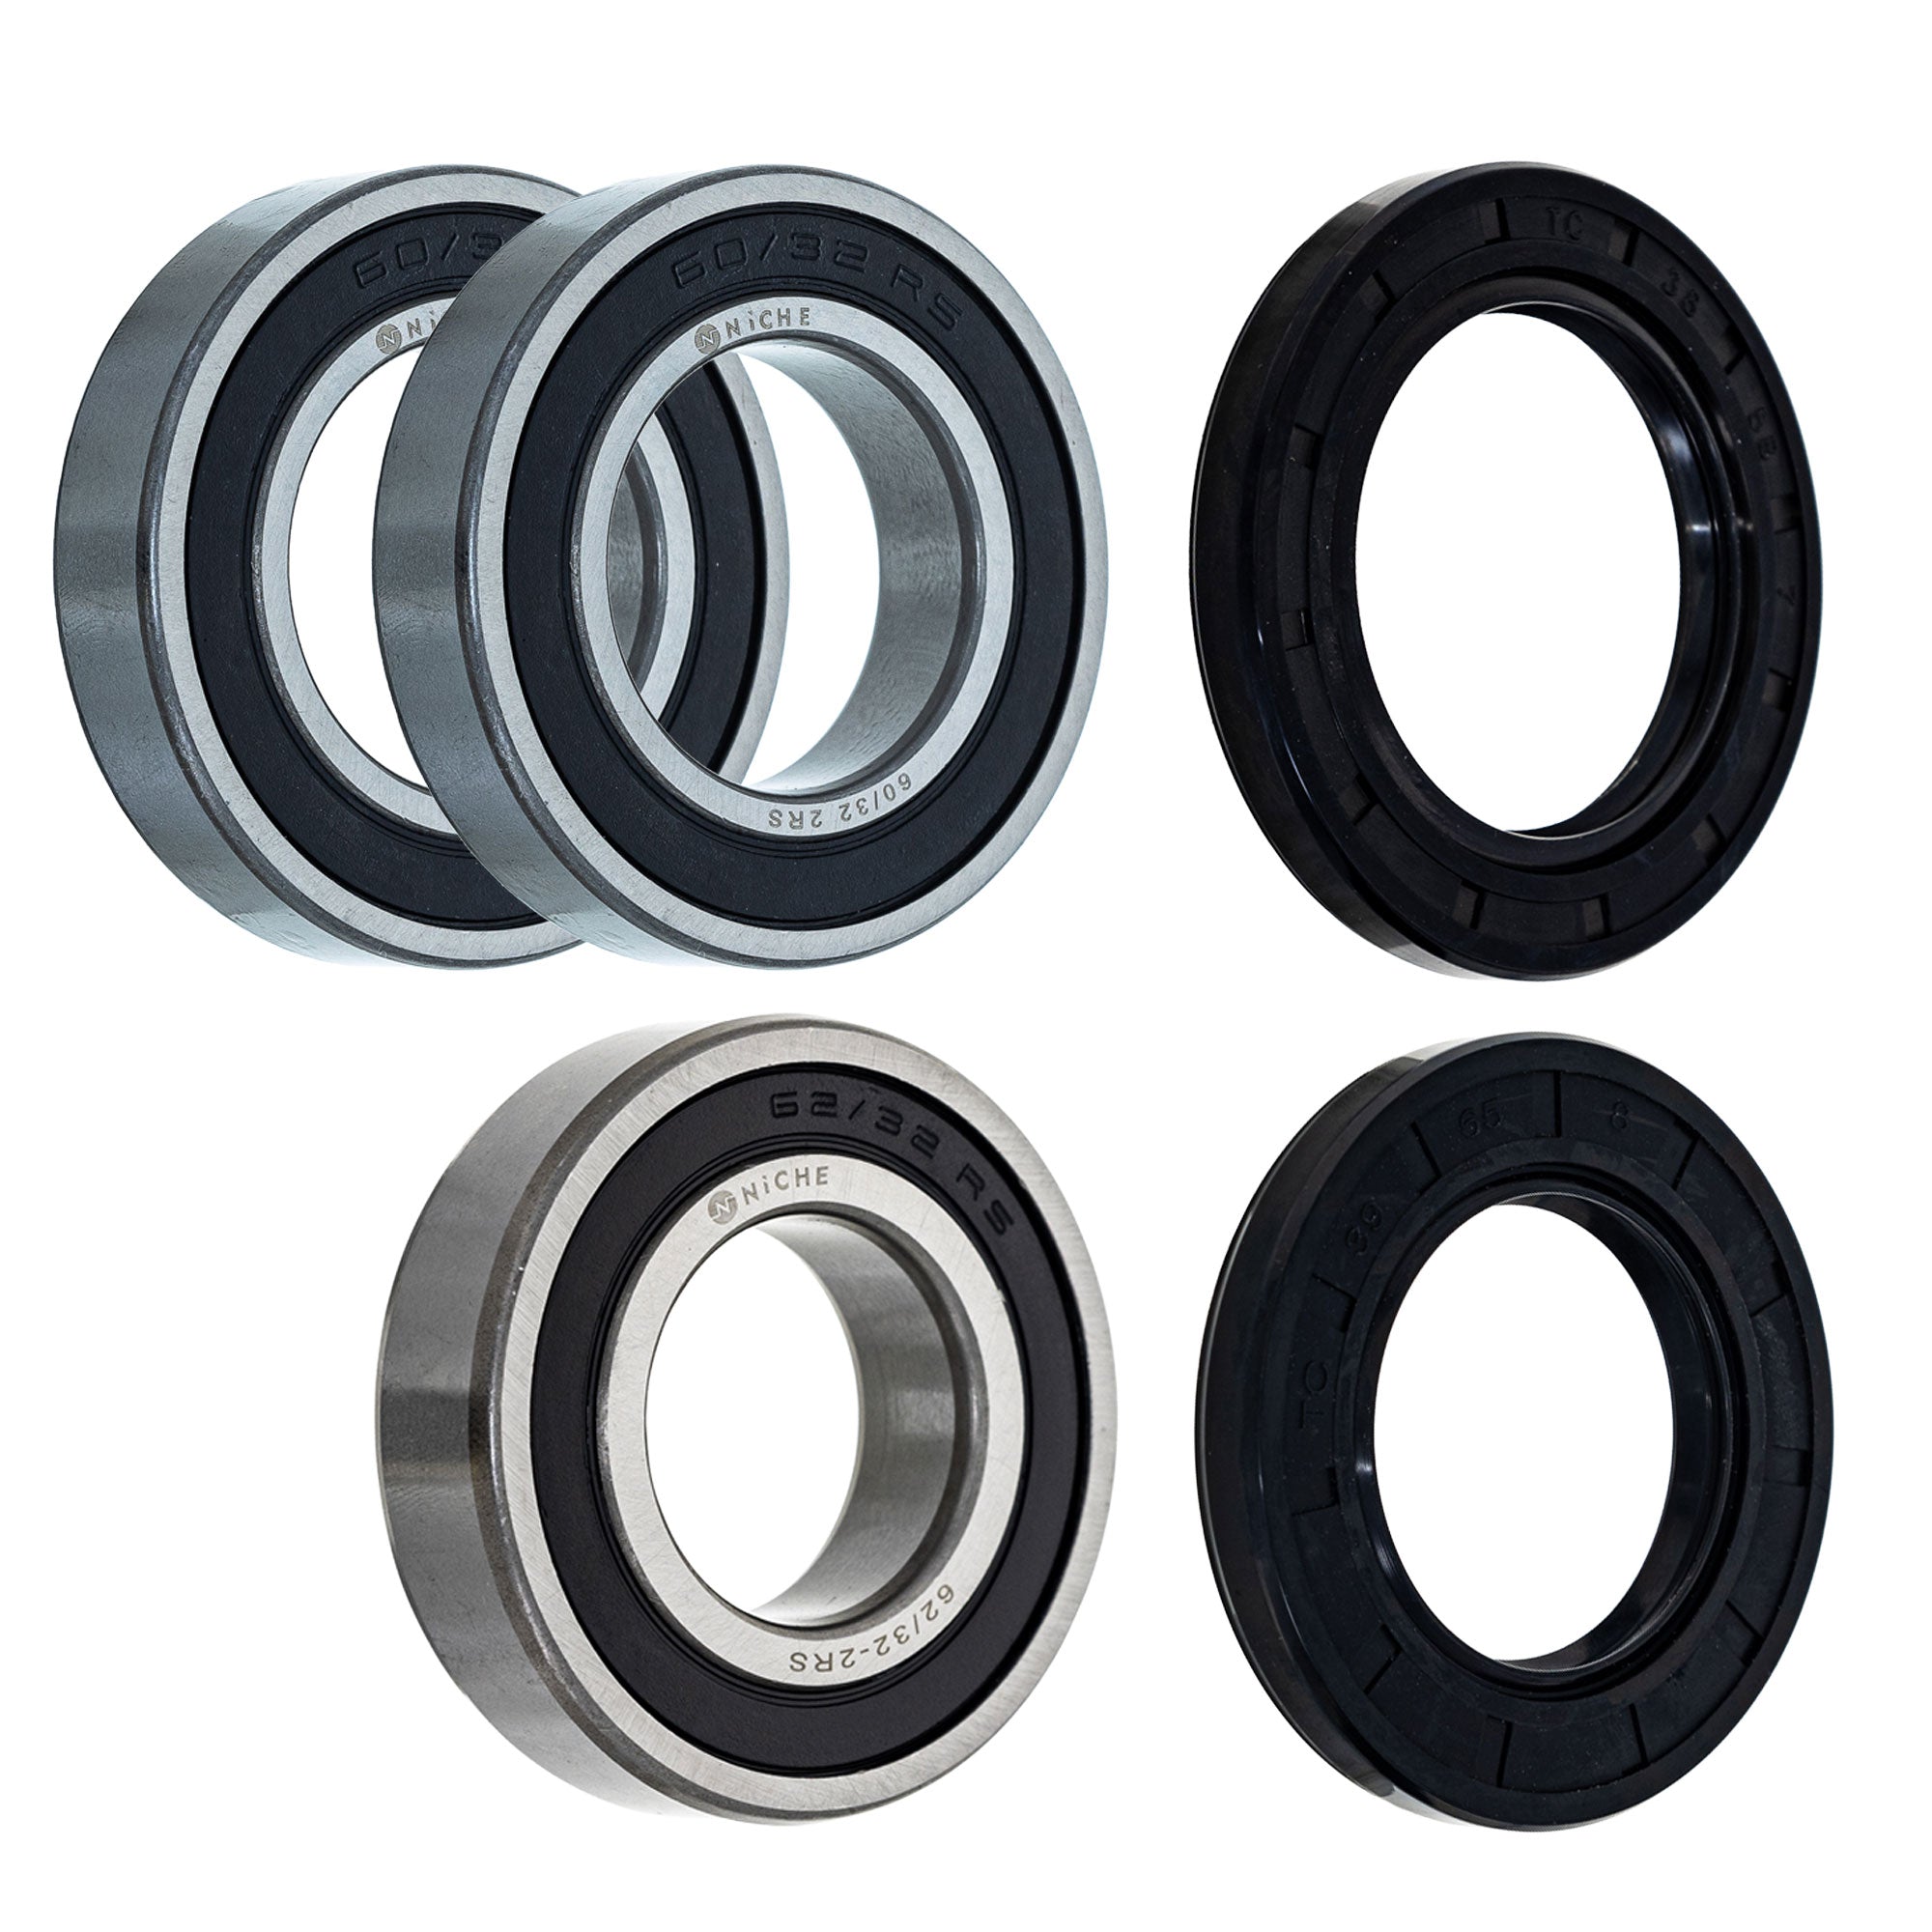 Wheel Bearing Seal Kit for zOTHER TL1000S TL1000R NICHE MK1008922